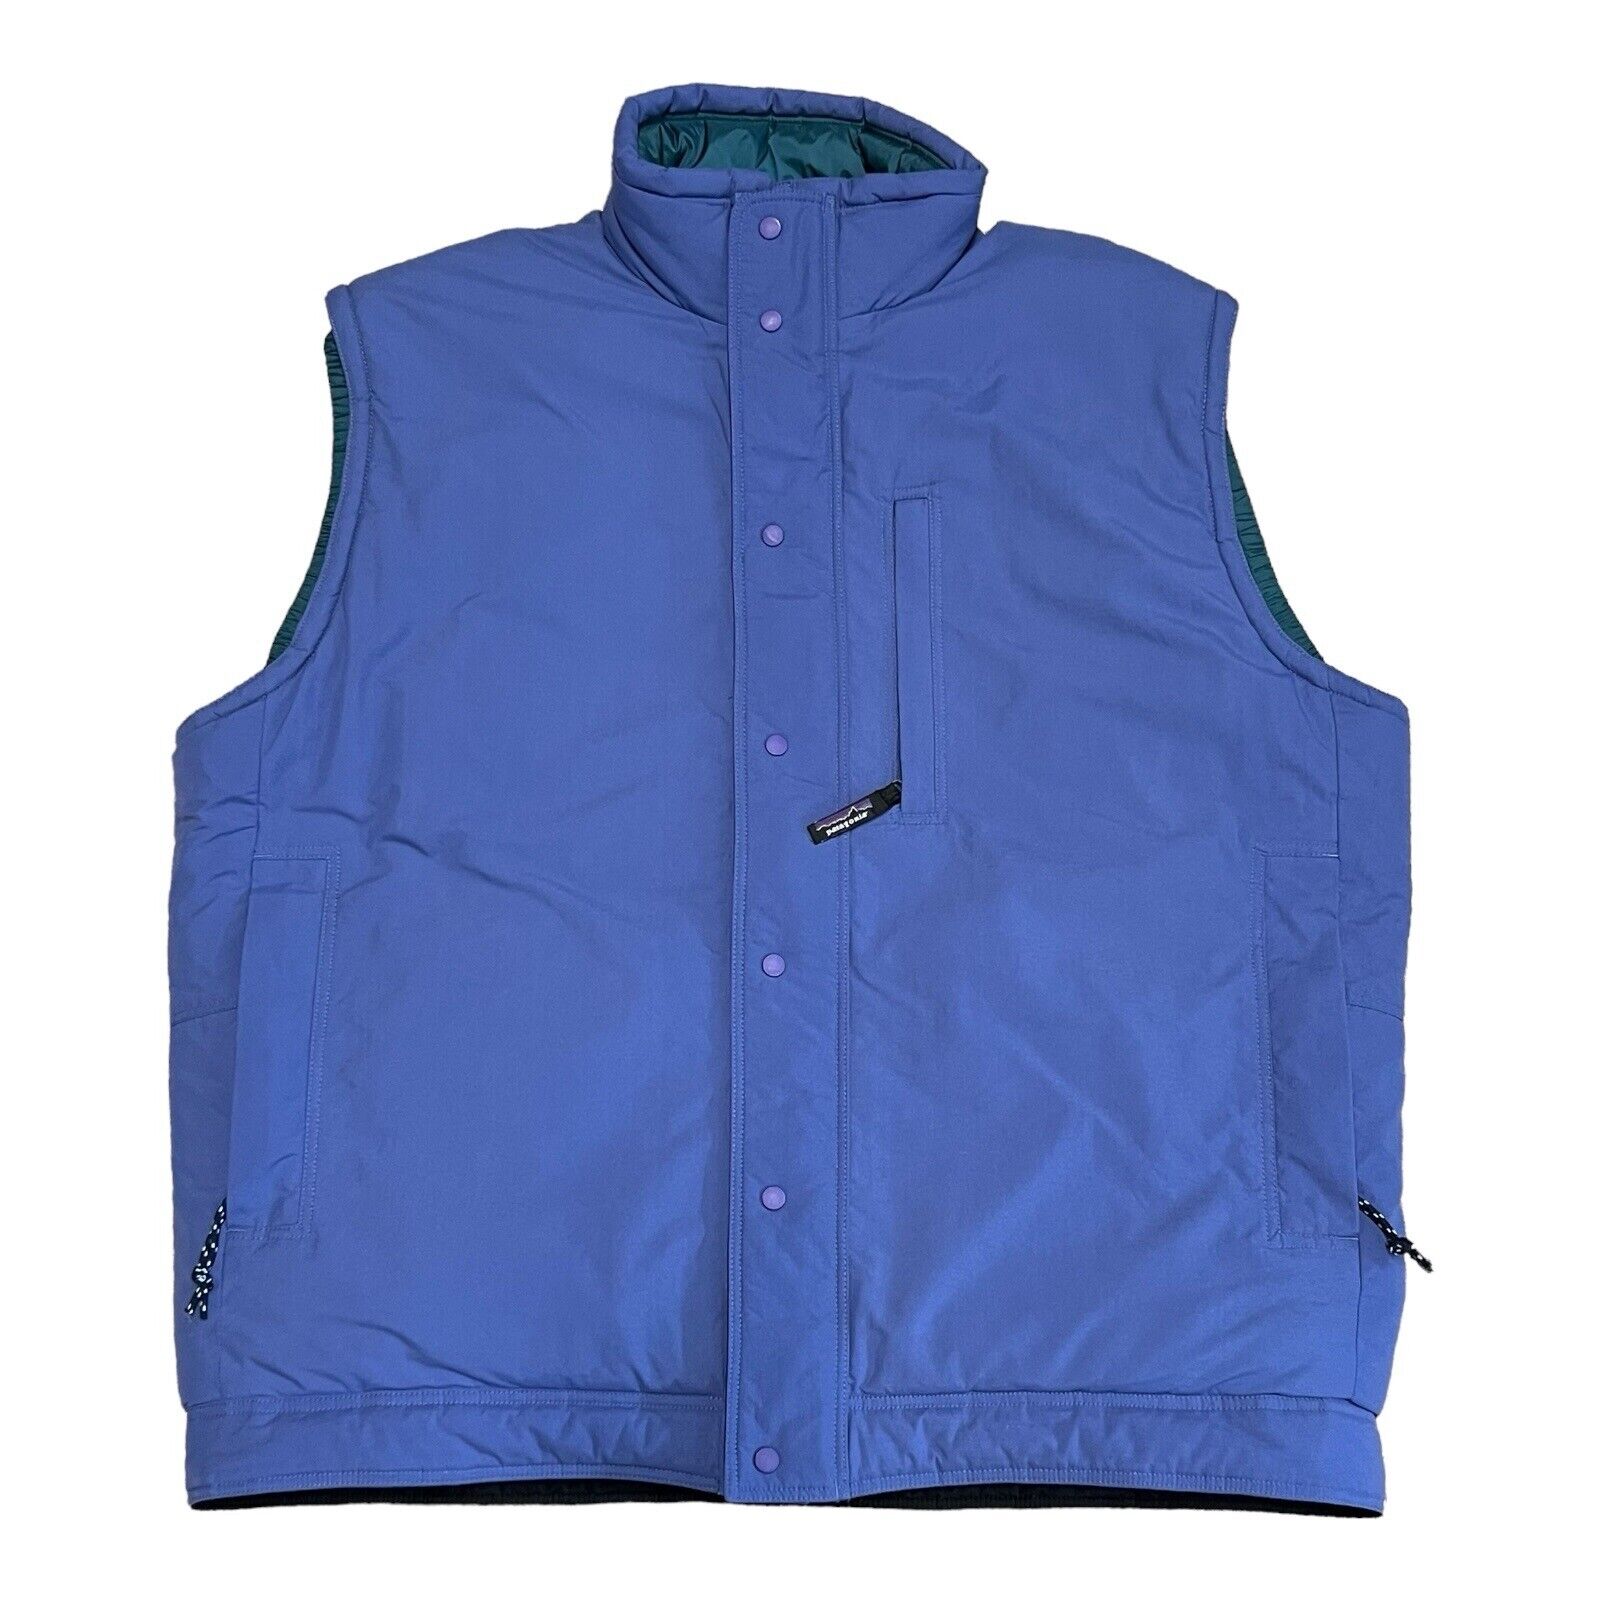 Vintage Patagonia Vest Mens Large Blue BTU Insulated 90s F7 Big Thick Utility